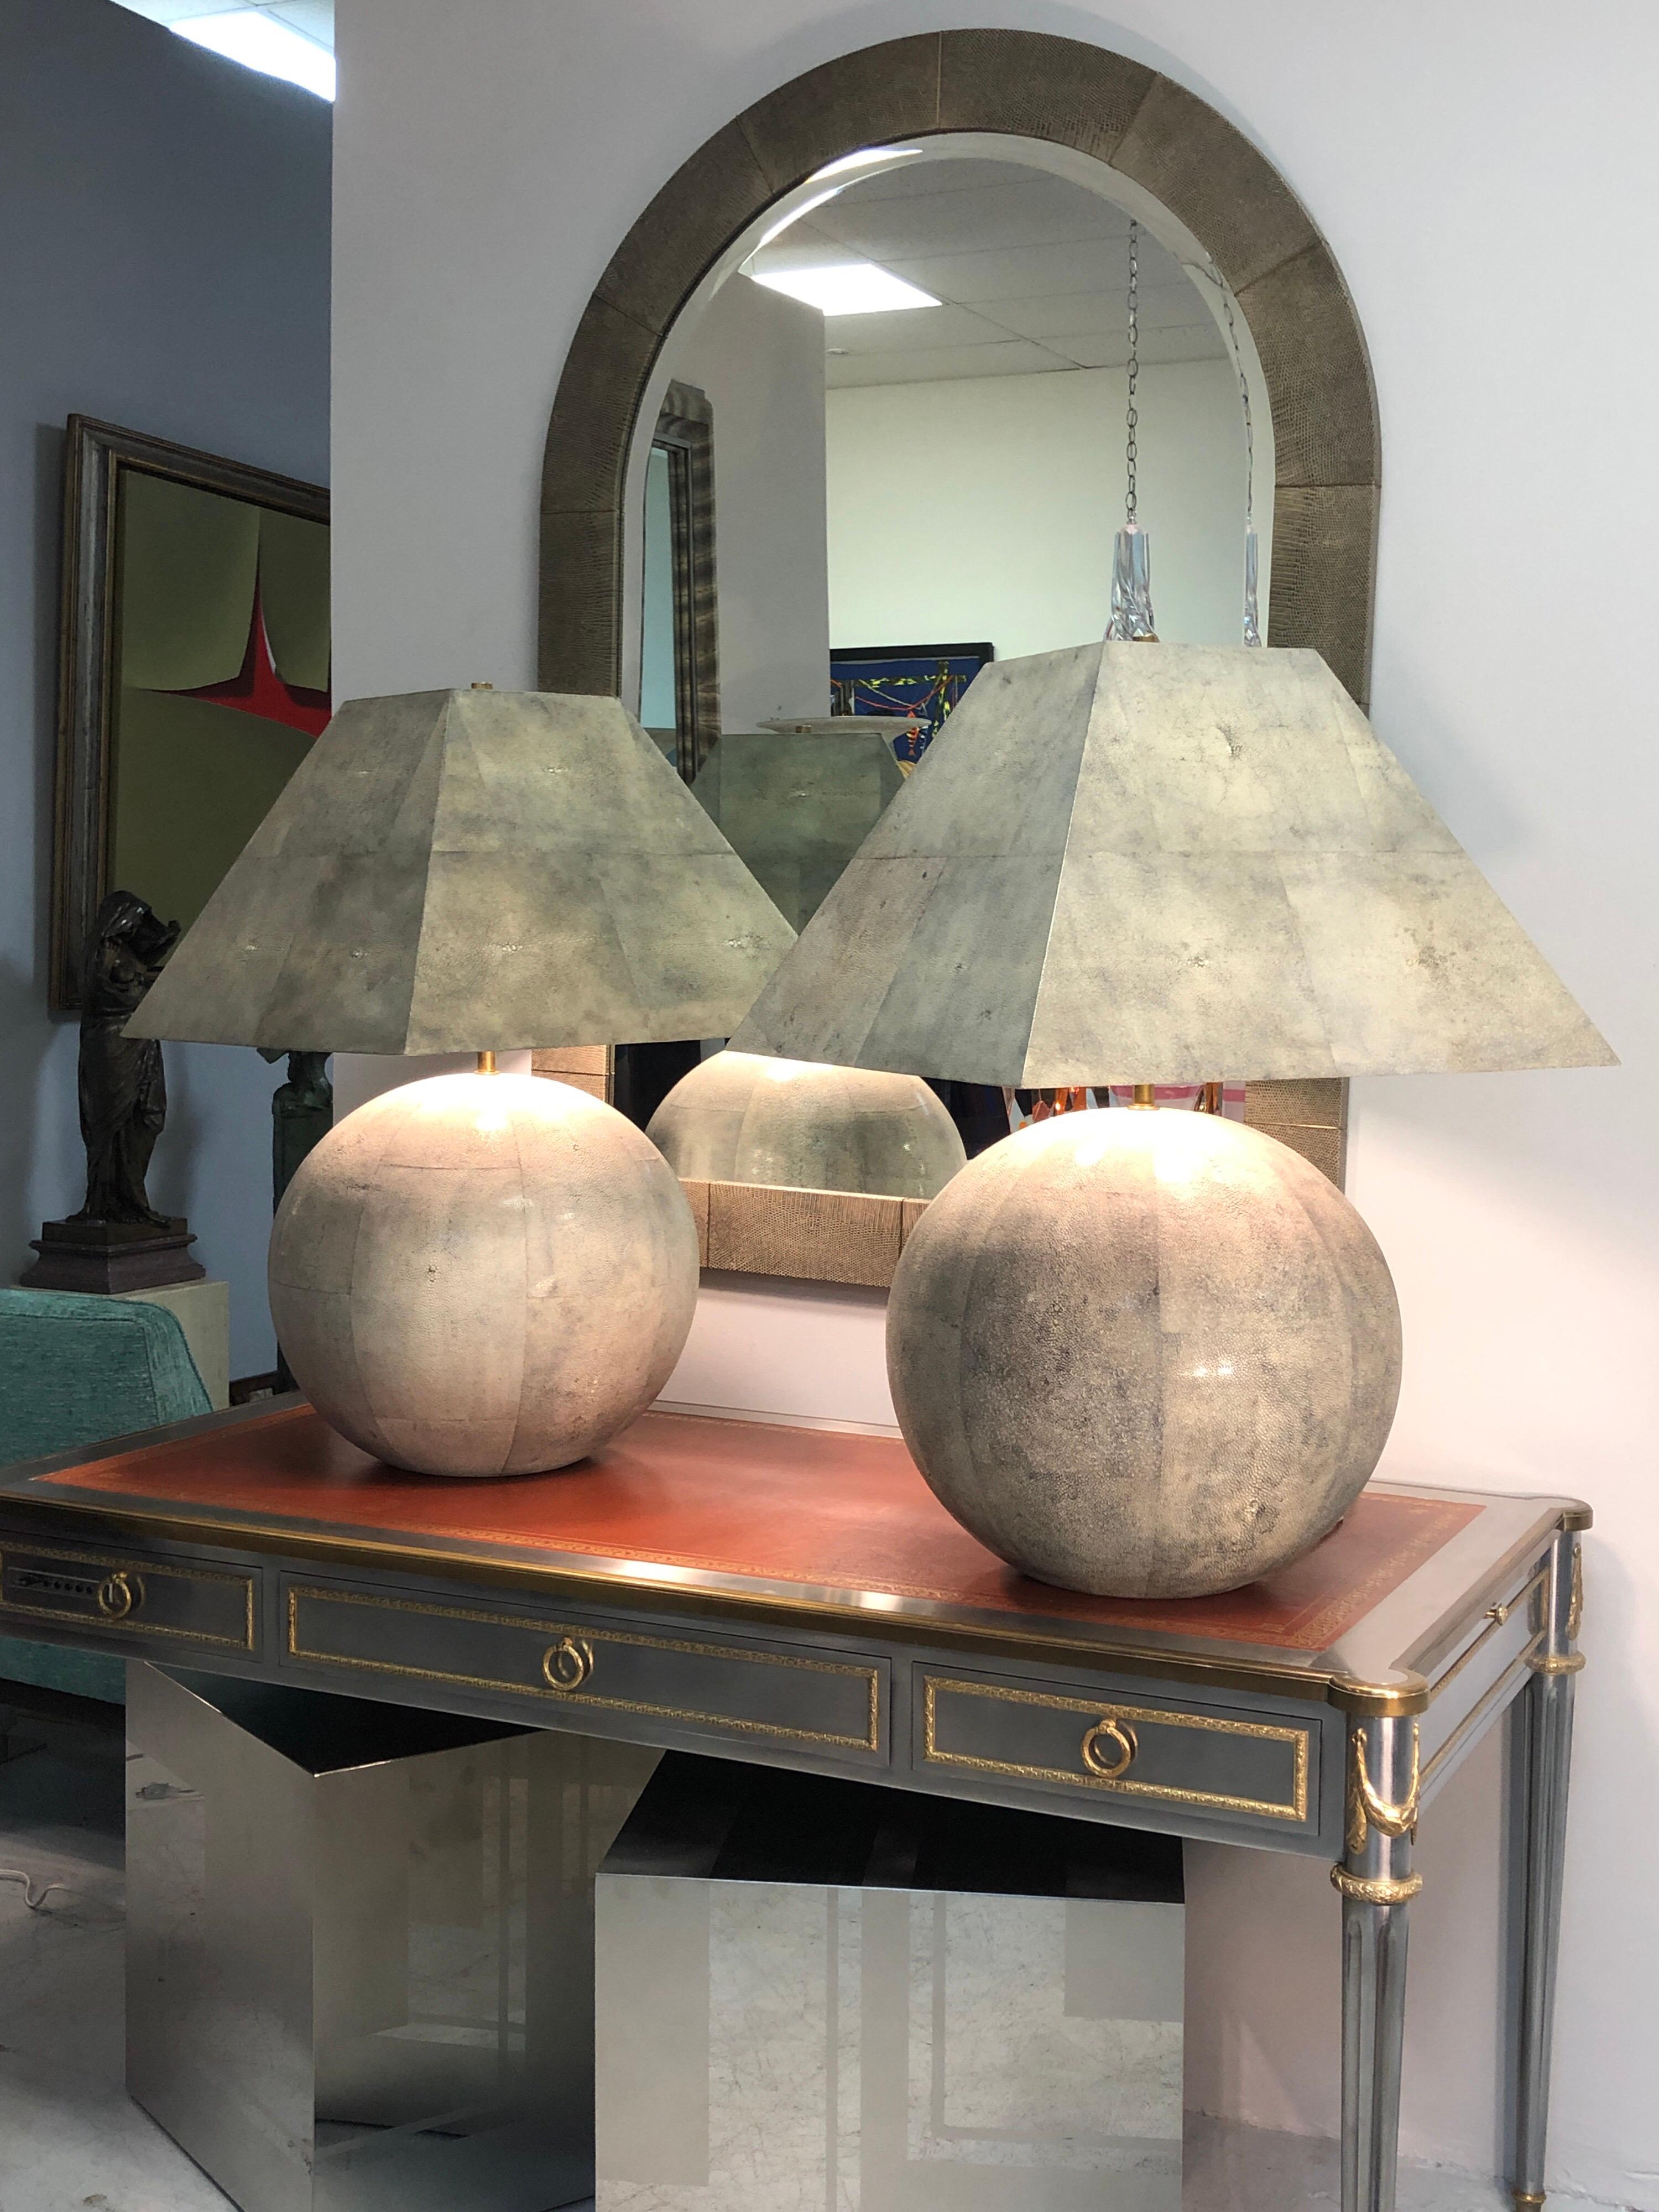 A pair of exquisite lamps by Karl Springer. The large spheres are solid wood meticulously covered in shagreen, the Pyramid shades are also wood covered in shagreen. Reportedly just a handful of these lamps were created making this pair an extremely